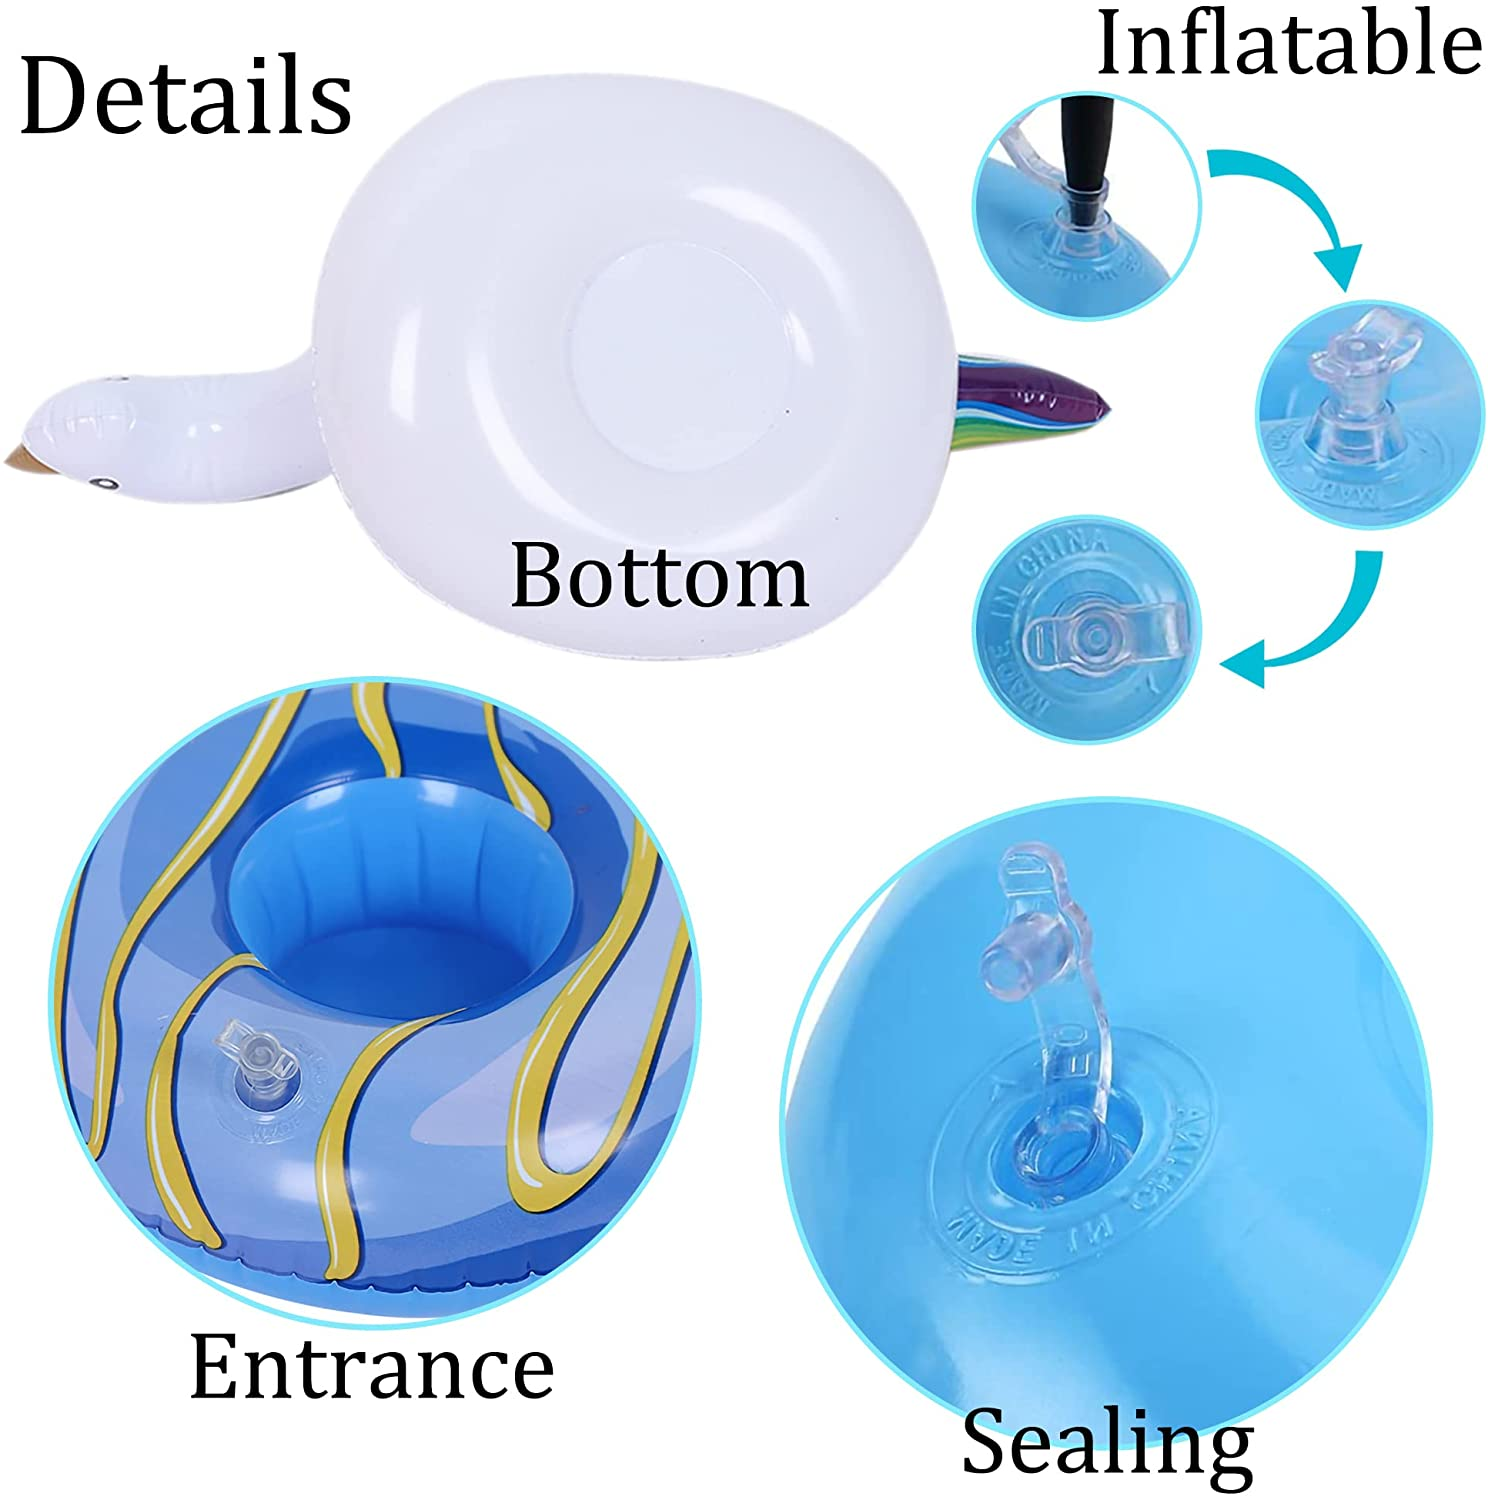 Inflatable Drink Holder 20 Pack Inflatable Cup Holders Drink Floats for Summer Pool Party, Variety Drink Floaties